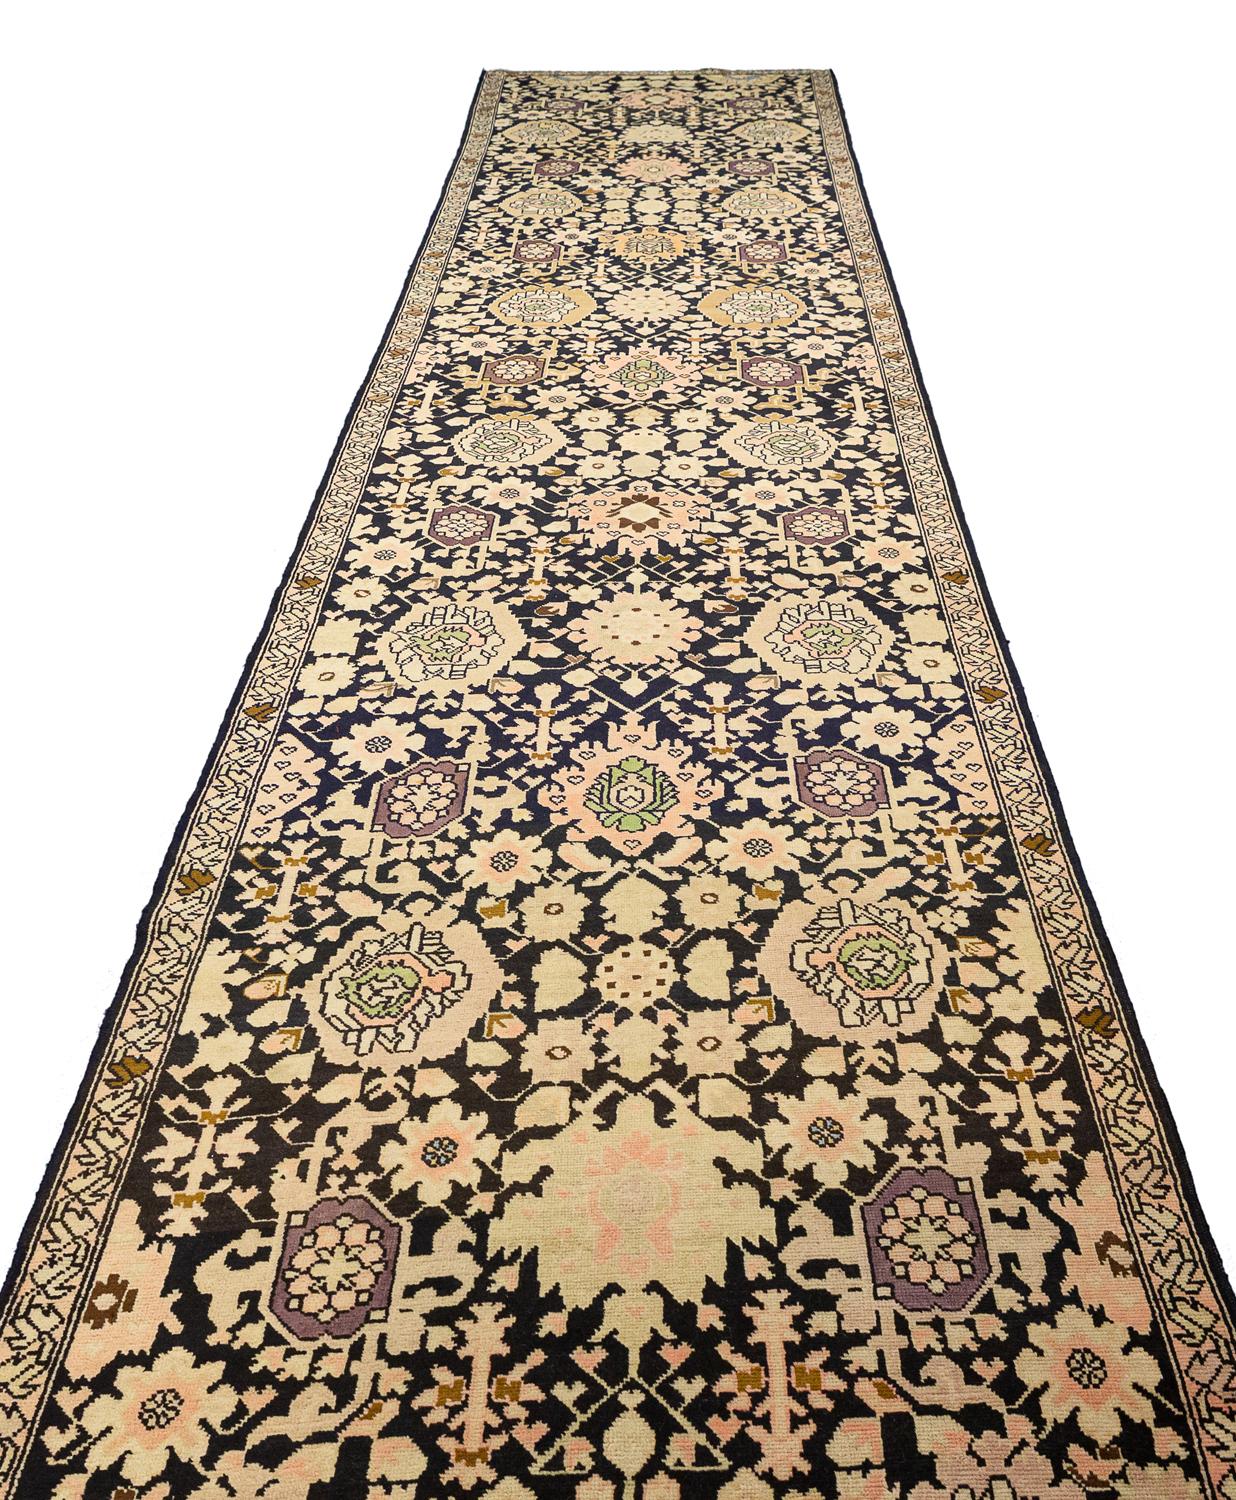 This antique Karabakh Runner Corridor size carpet woven circa 1900 is a must have for those who appreciate the beauty and history of carpets. The intricate designs and colors are stunning, and the quality of the weaving is excellent. This piece